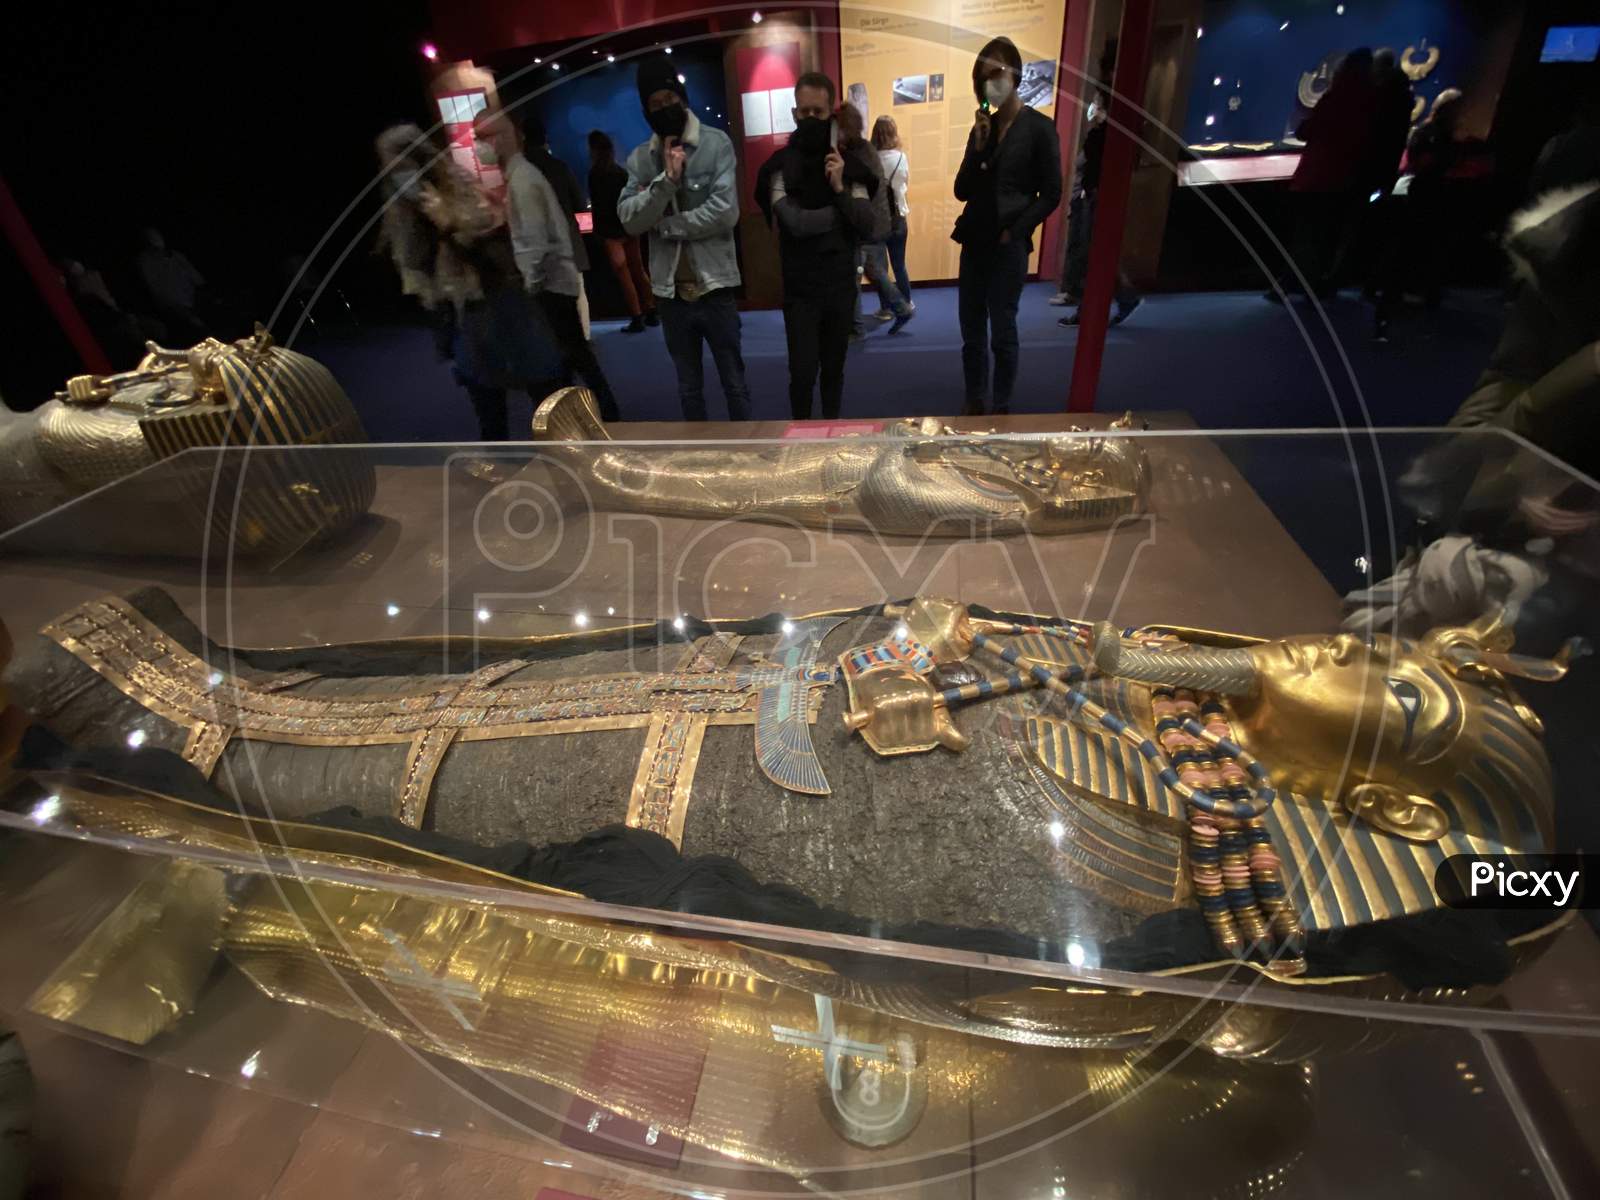 Tomb And Treasures With Gold Mask And Replicas From Egypt Pharaoh Tutankhamun. 14.03.2021 - Oerlikon, Switzerland.